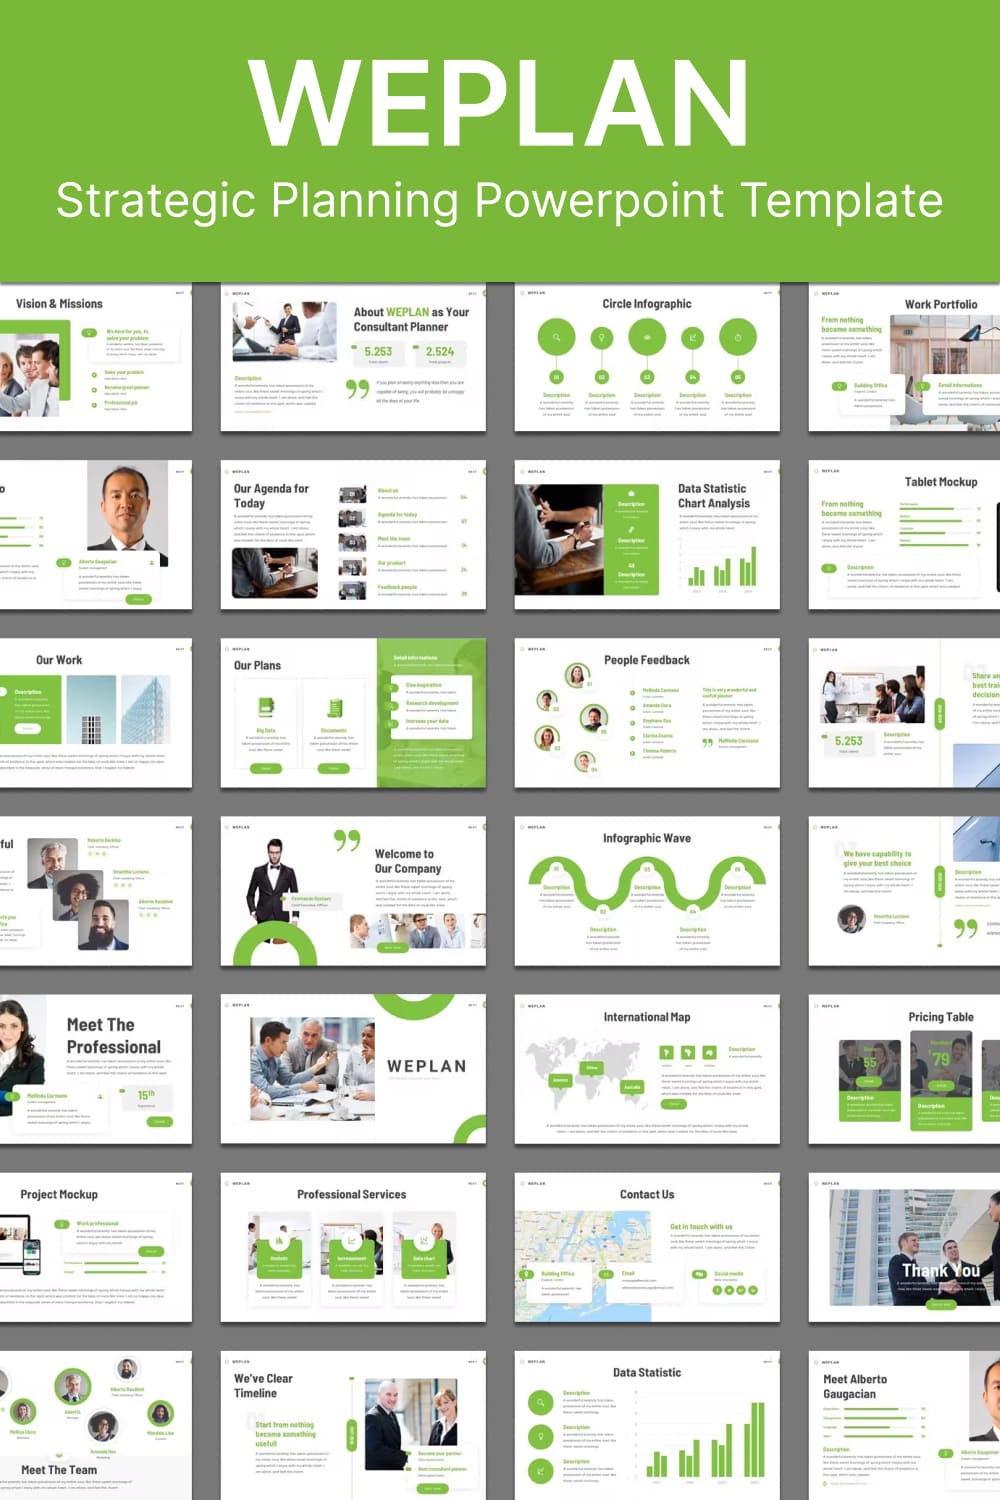 Weplan strategic planning powerpoint template - pinterest image preview.